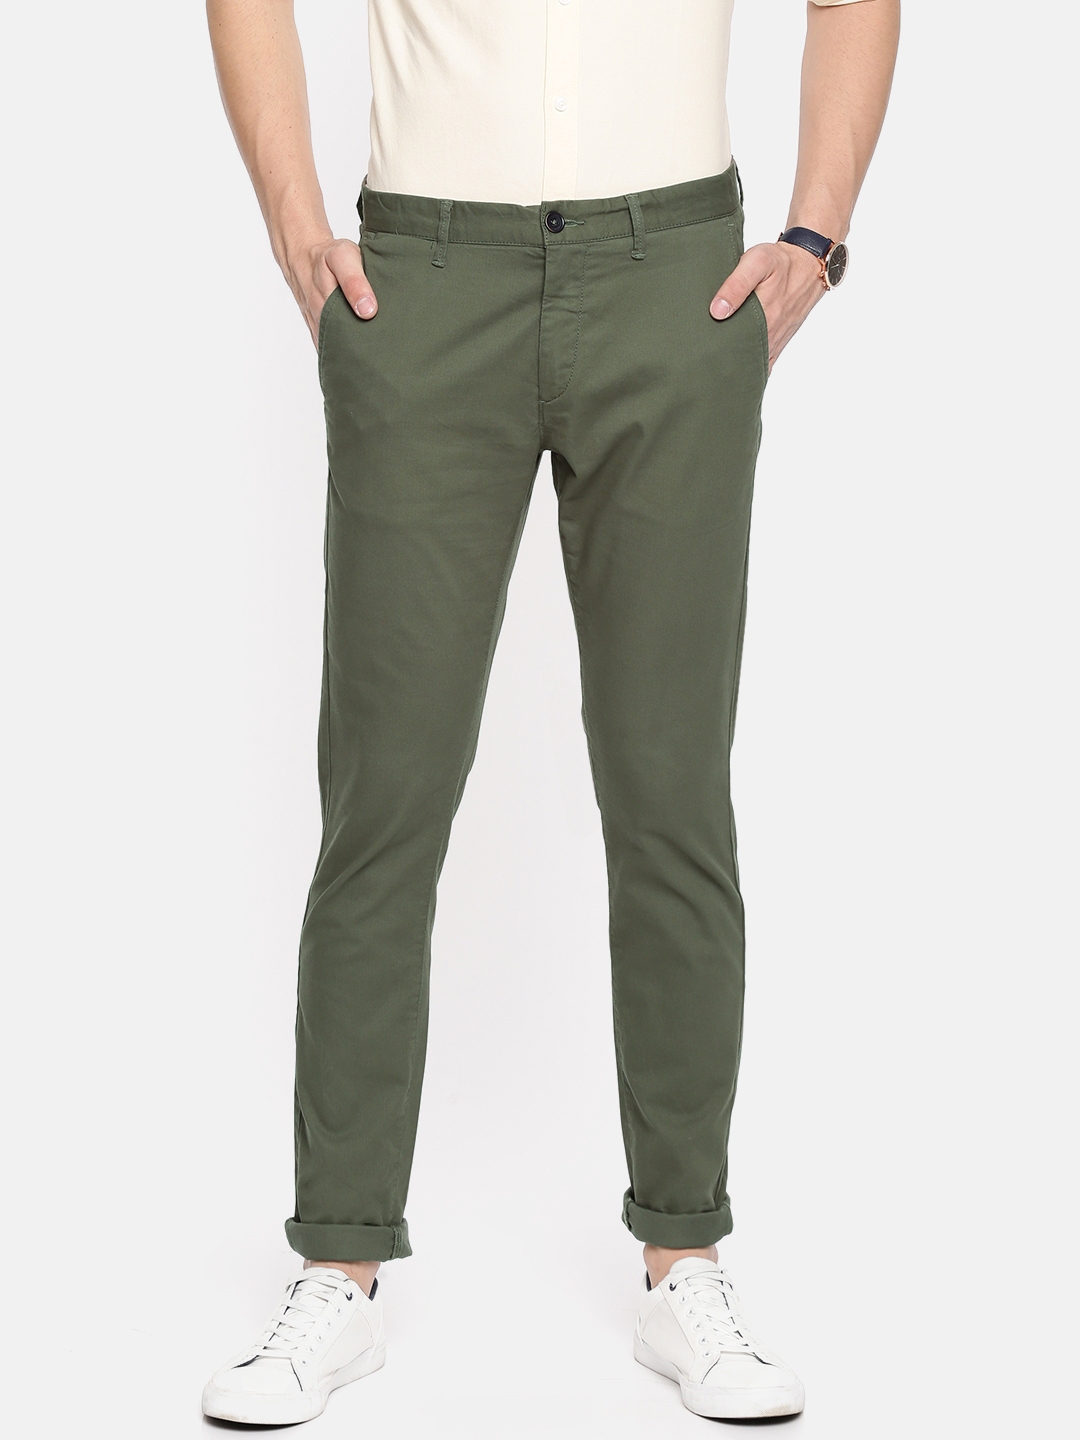 Buy U.S. Polo Assn. Men Olive Green Slim Fit Solid Chinos - Trousers ...